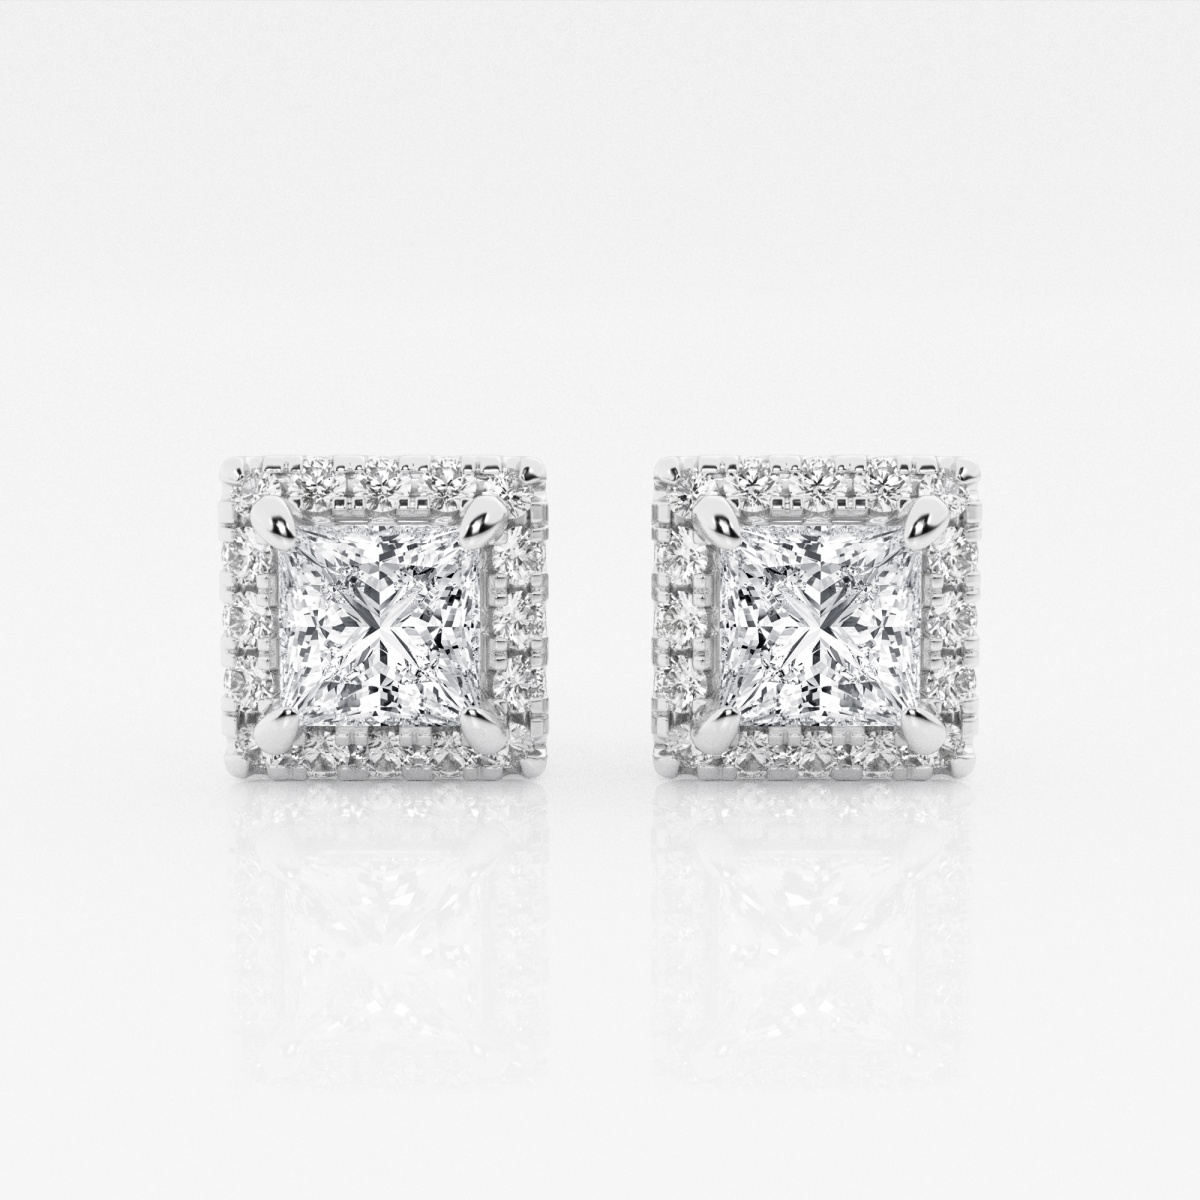 Additional Image 2 for  2 3/8 ctw Princess Lab Grown Diamond Halo Certified Stud Earrings